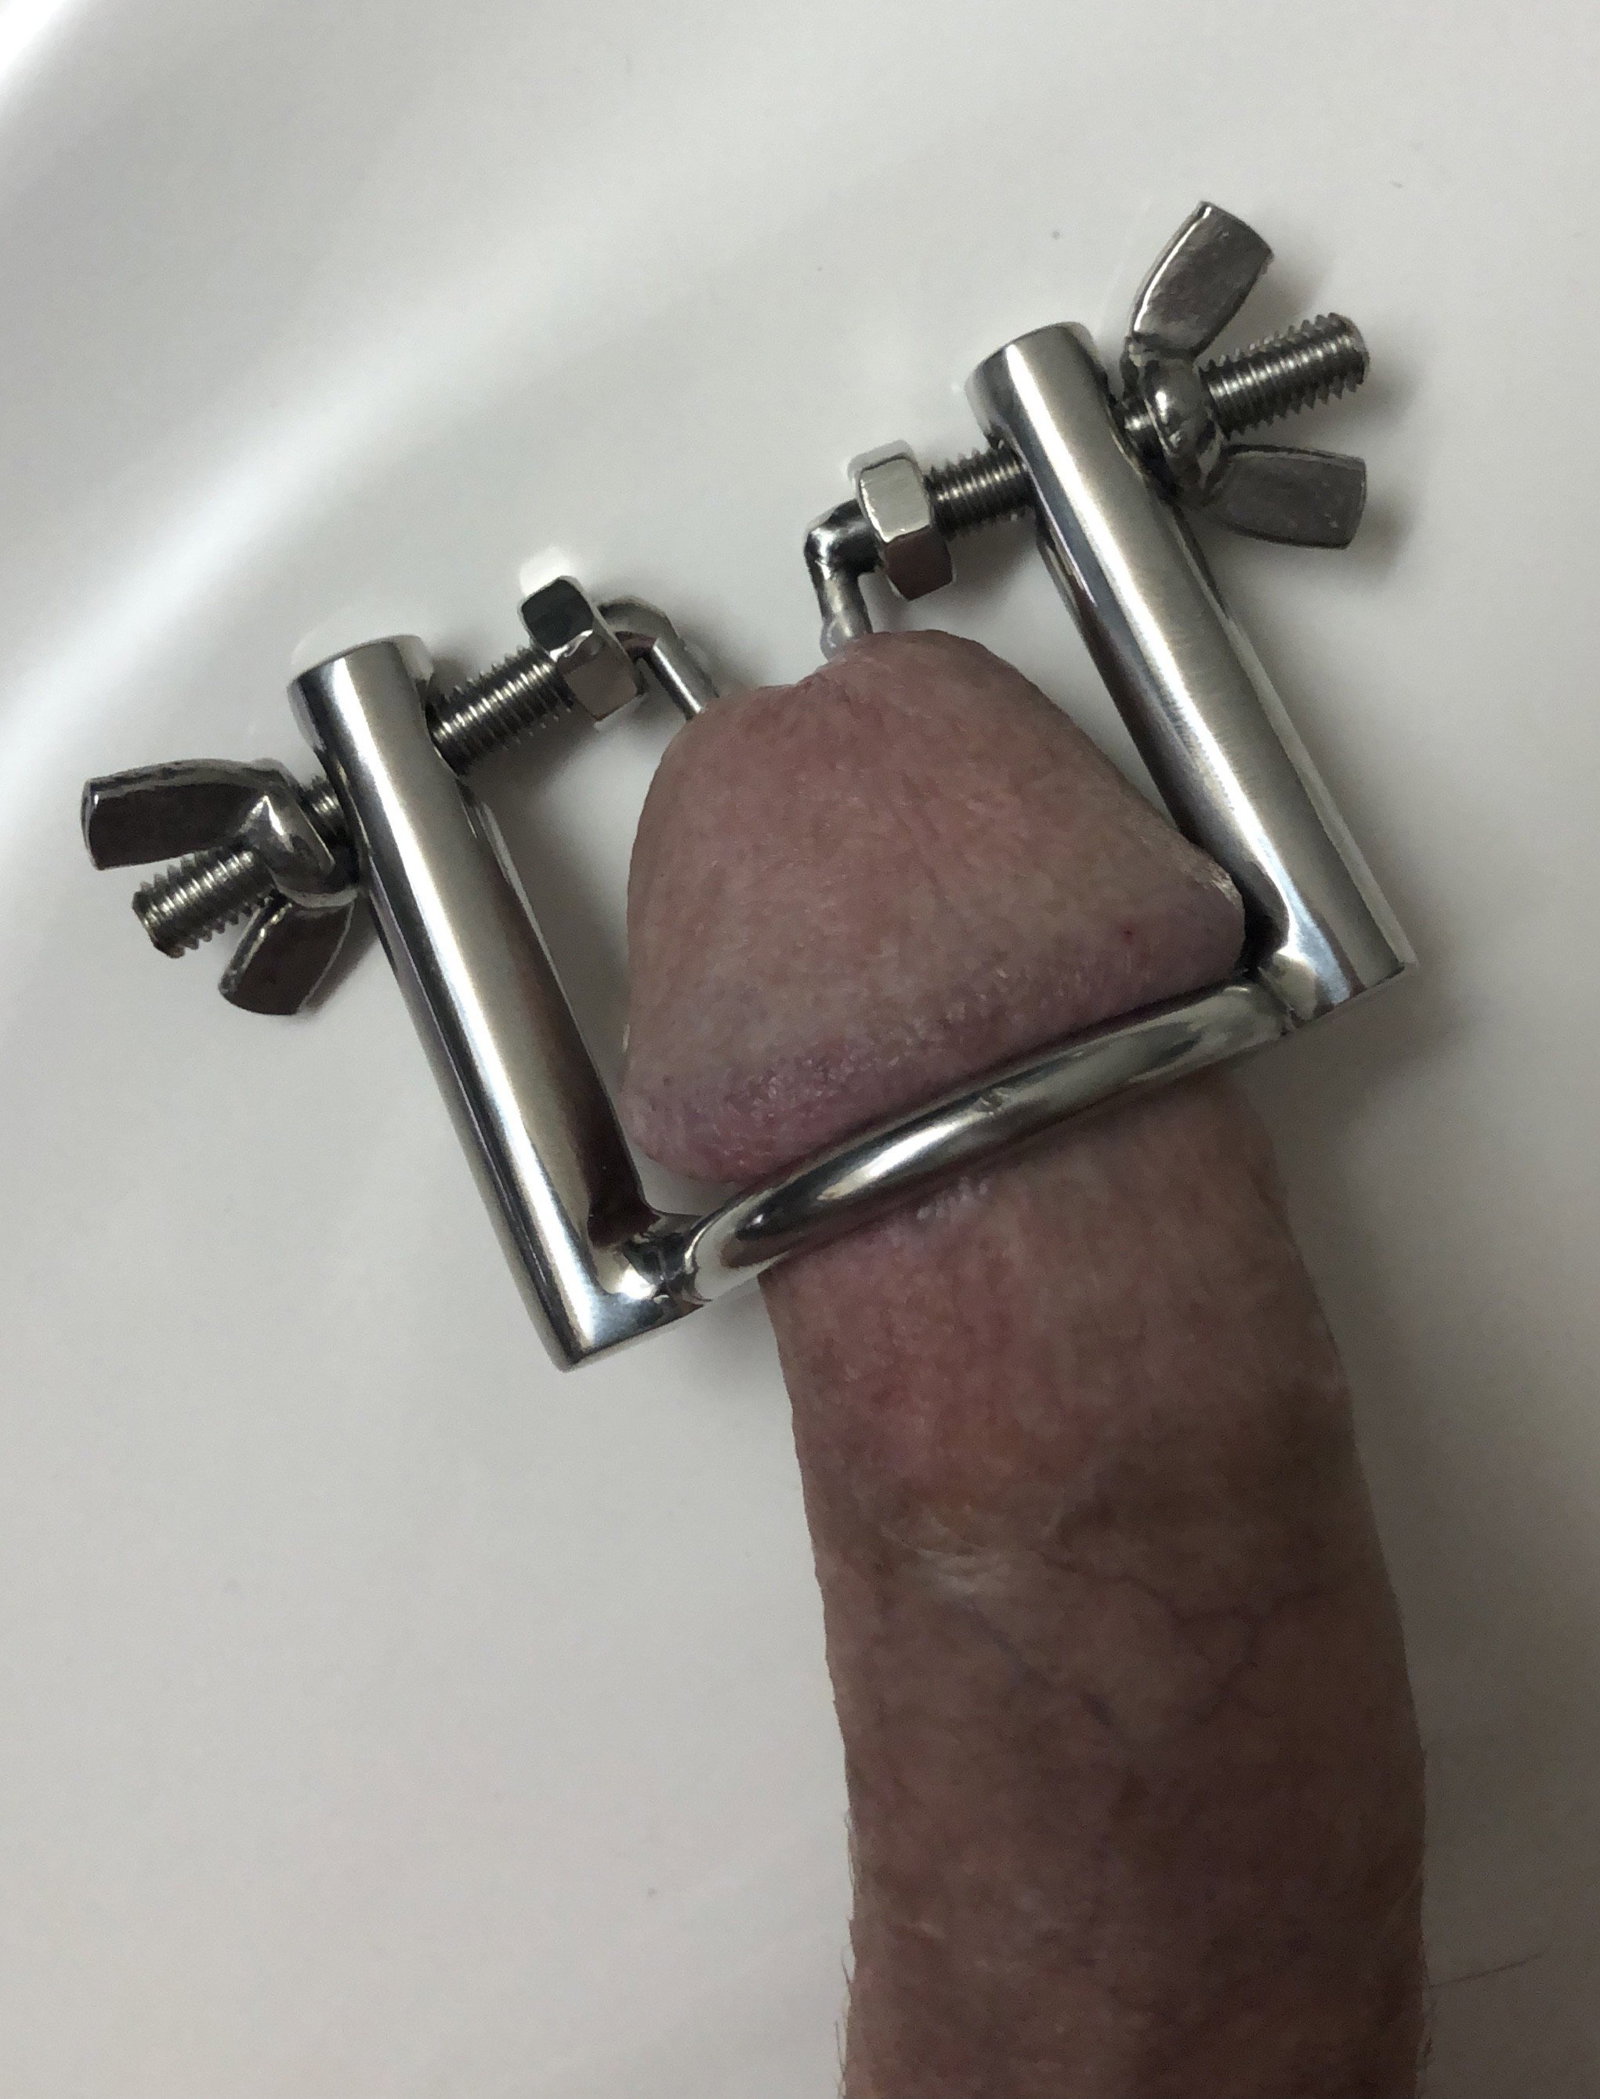 Watch the Photo by YankeeStretch with the username @YankeeStretch, posted on May 12, 2022. The post is about the topic Urethral stretching. and the text says 'It's me YankeeStretch stretching my pee hole'